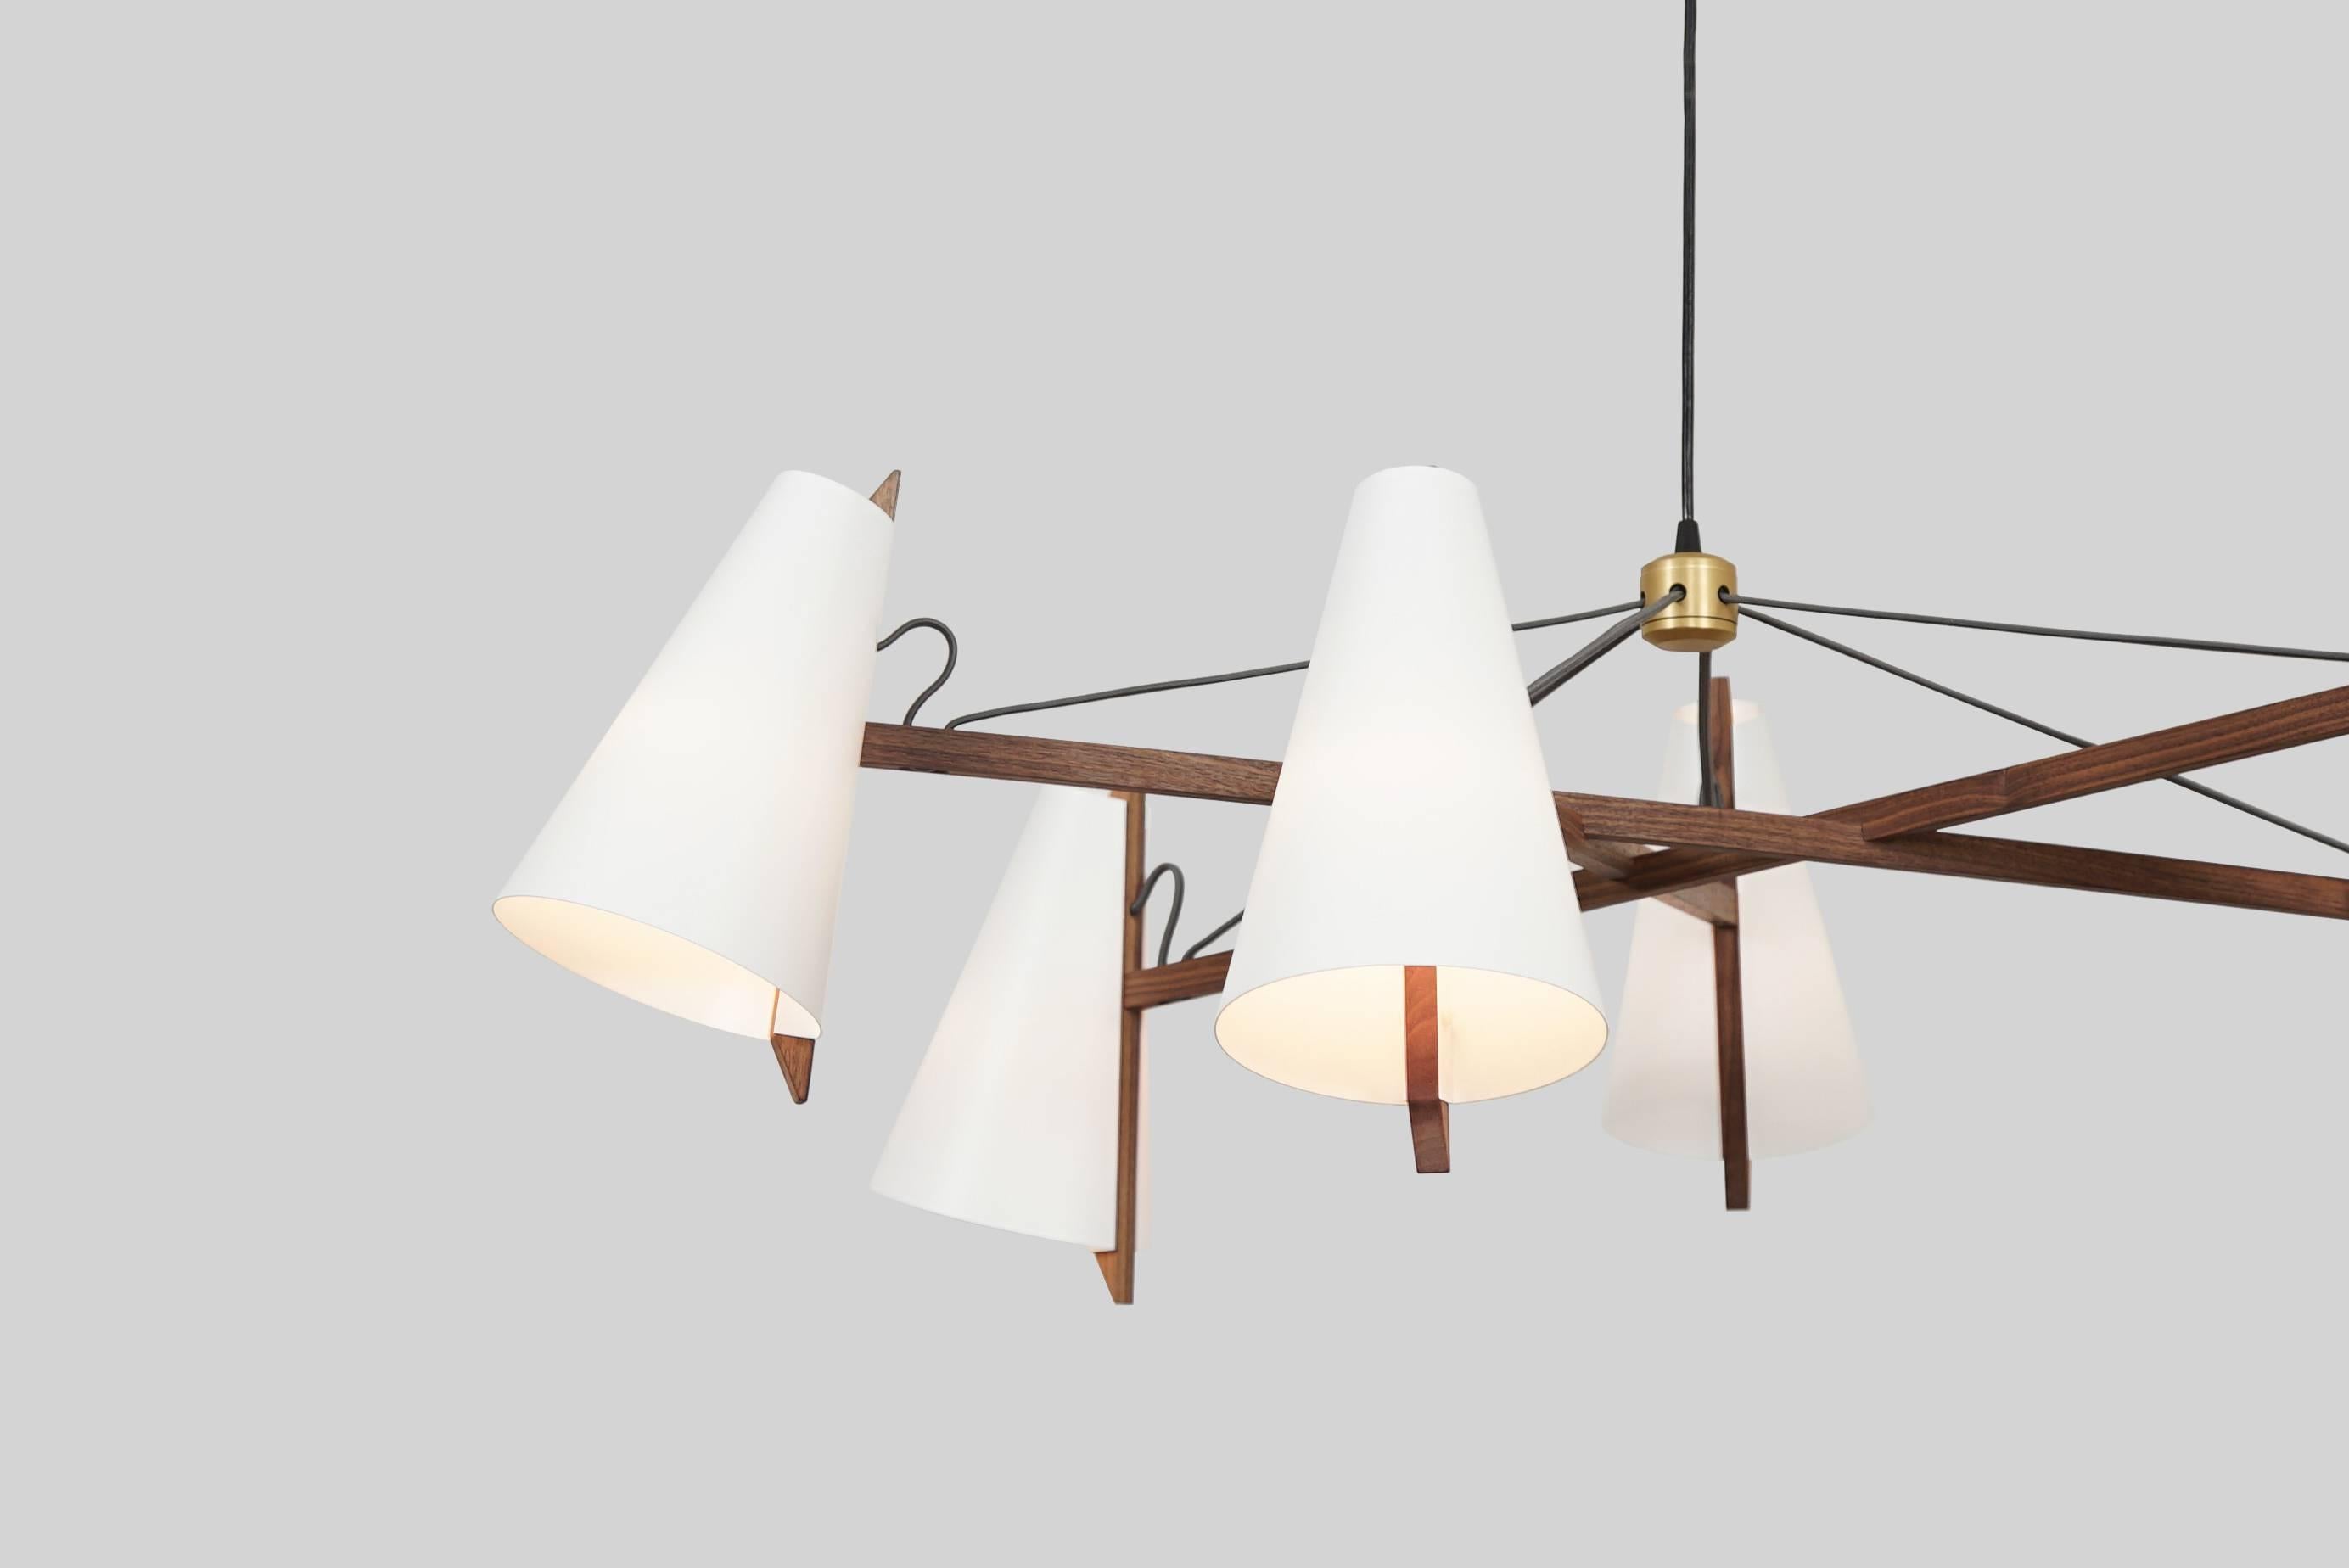 The Hood Family is inspired by wooden sailboats and the work of Aino Aalto. Thin sheets of polyethylene are die cut and bent, joining narrow spines of white oak to create the hooded shade. The complex joinery of the pendant and chandelier results in